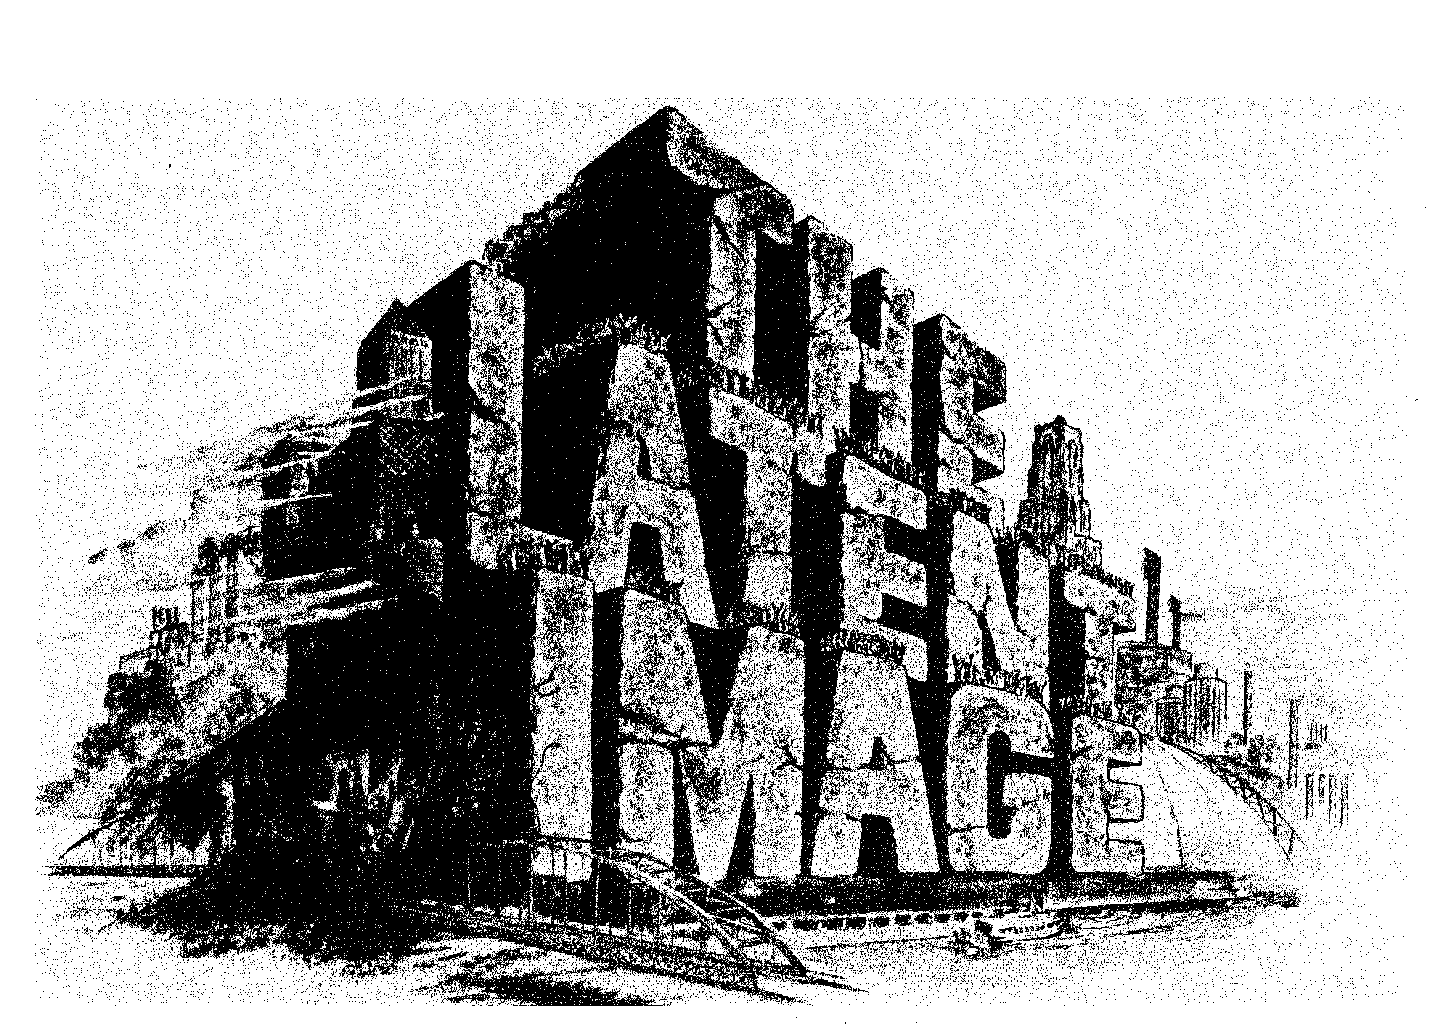 The Latent Image logo. Note the Cathedral of Learning, the Civic Arena, and other Pittsburgh landmarks in the background.[11]